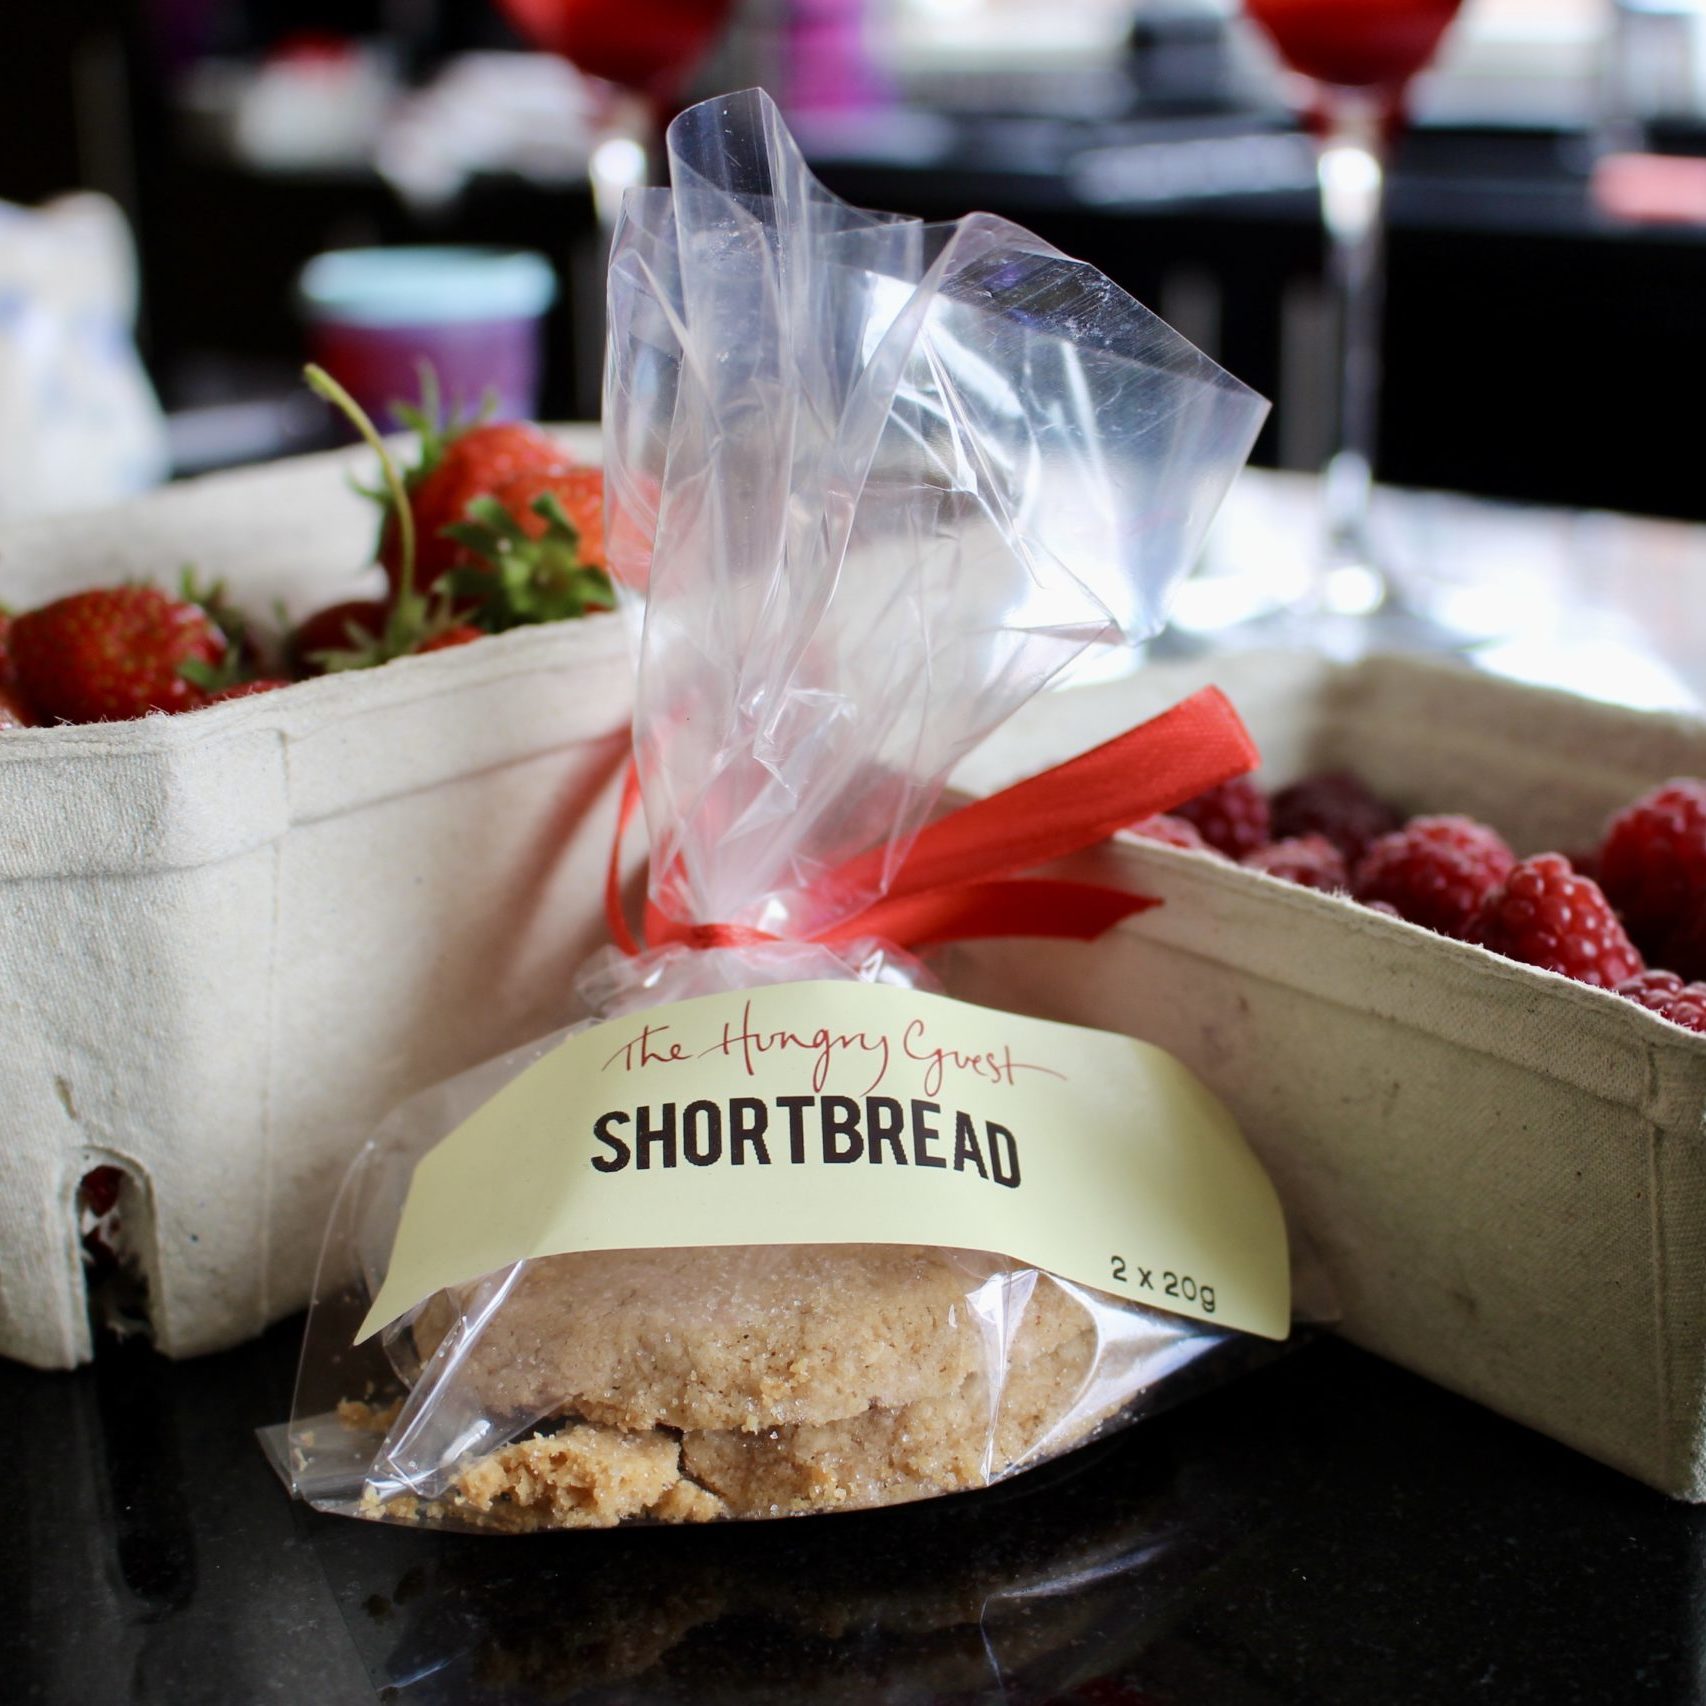 Mereworth Strawberries and raspberries and THG shortbread